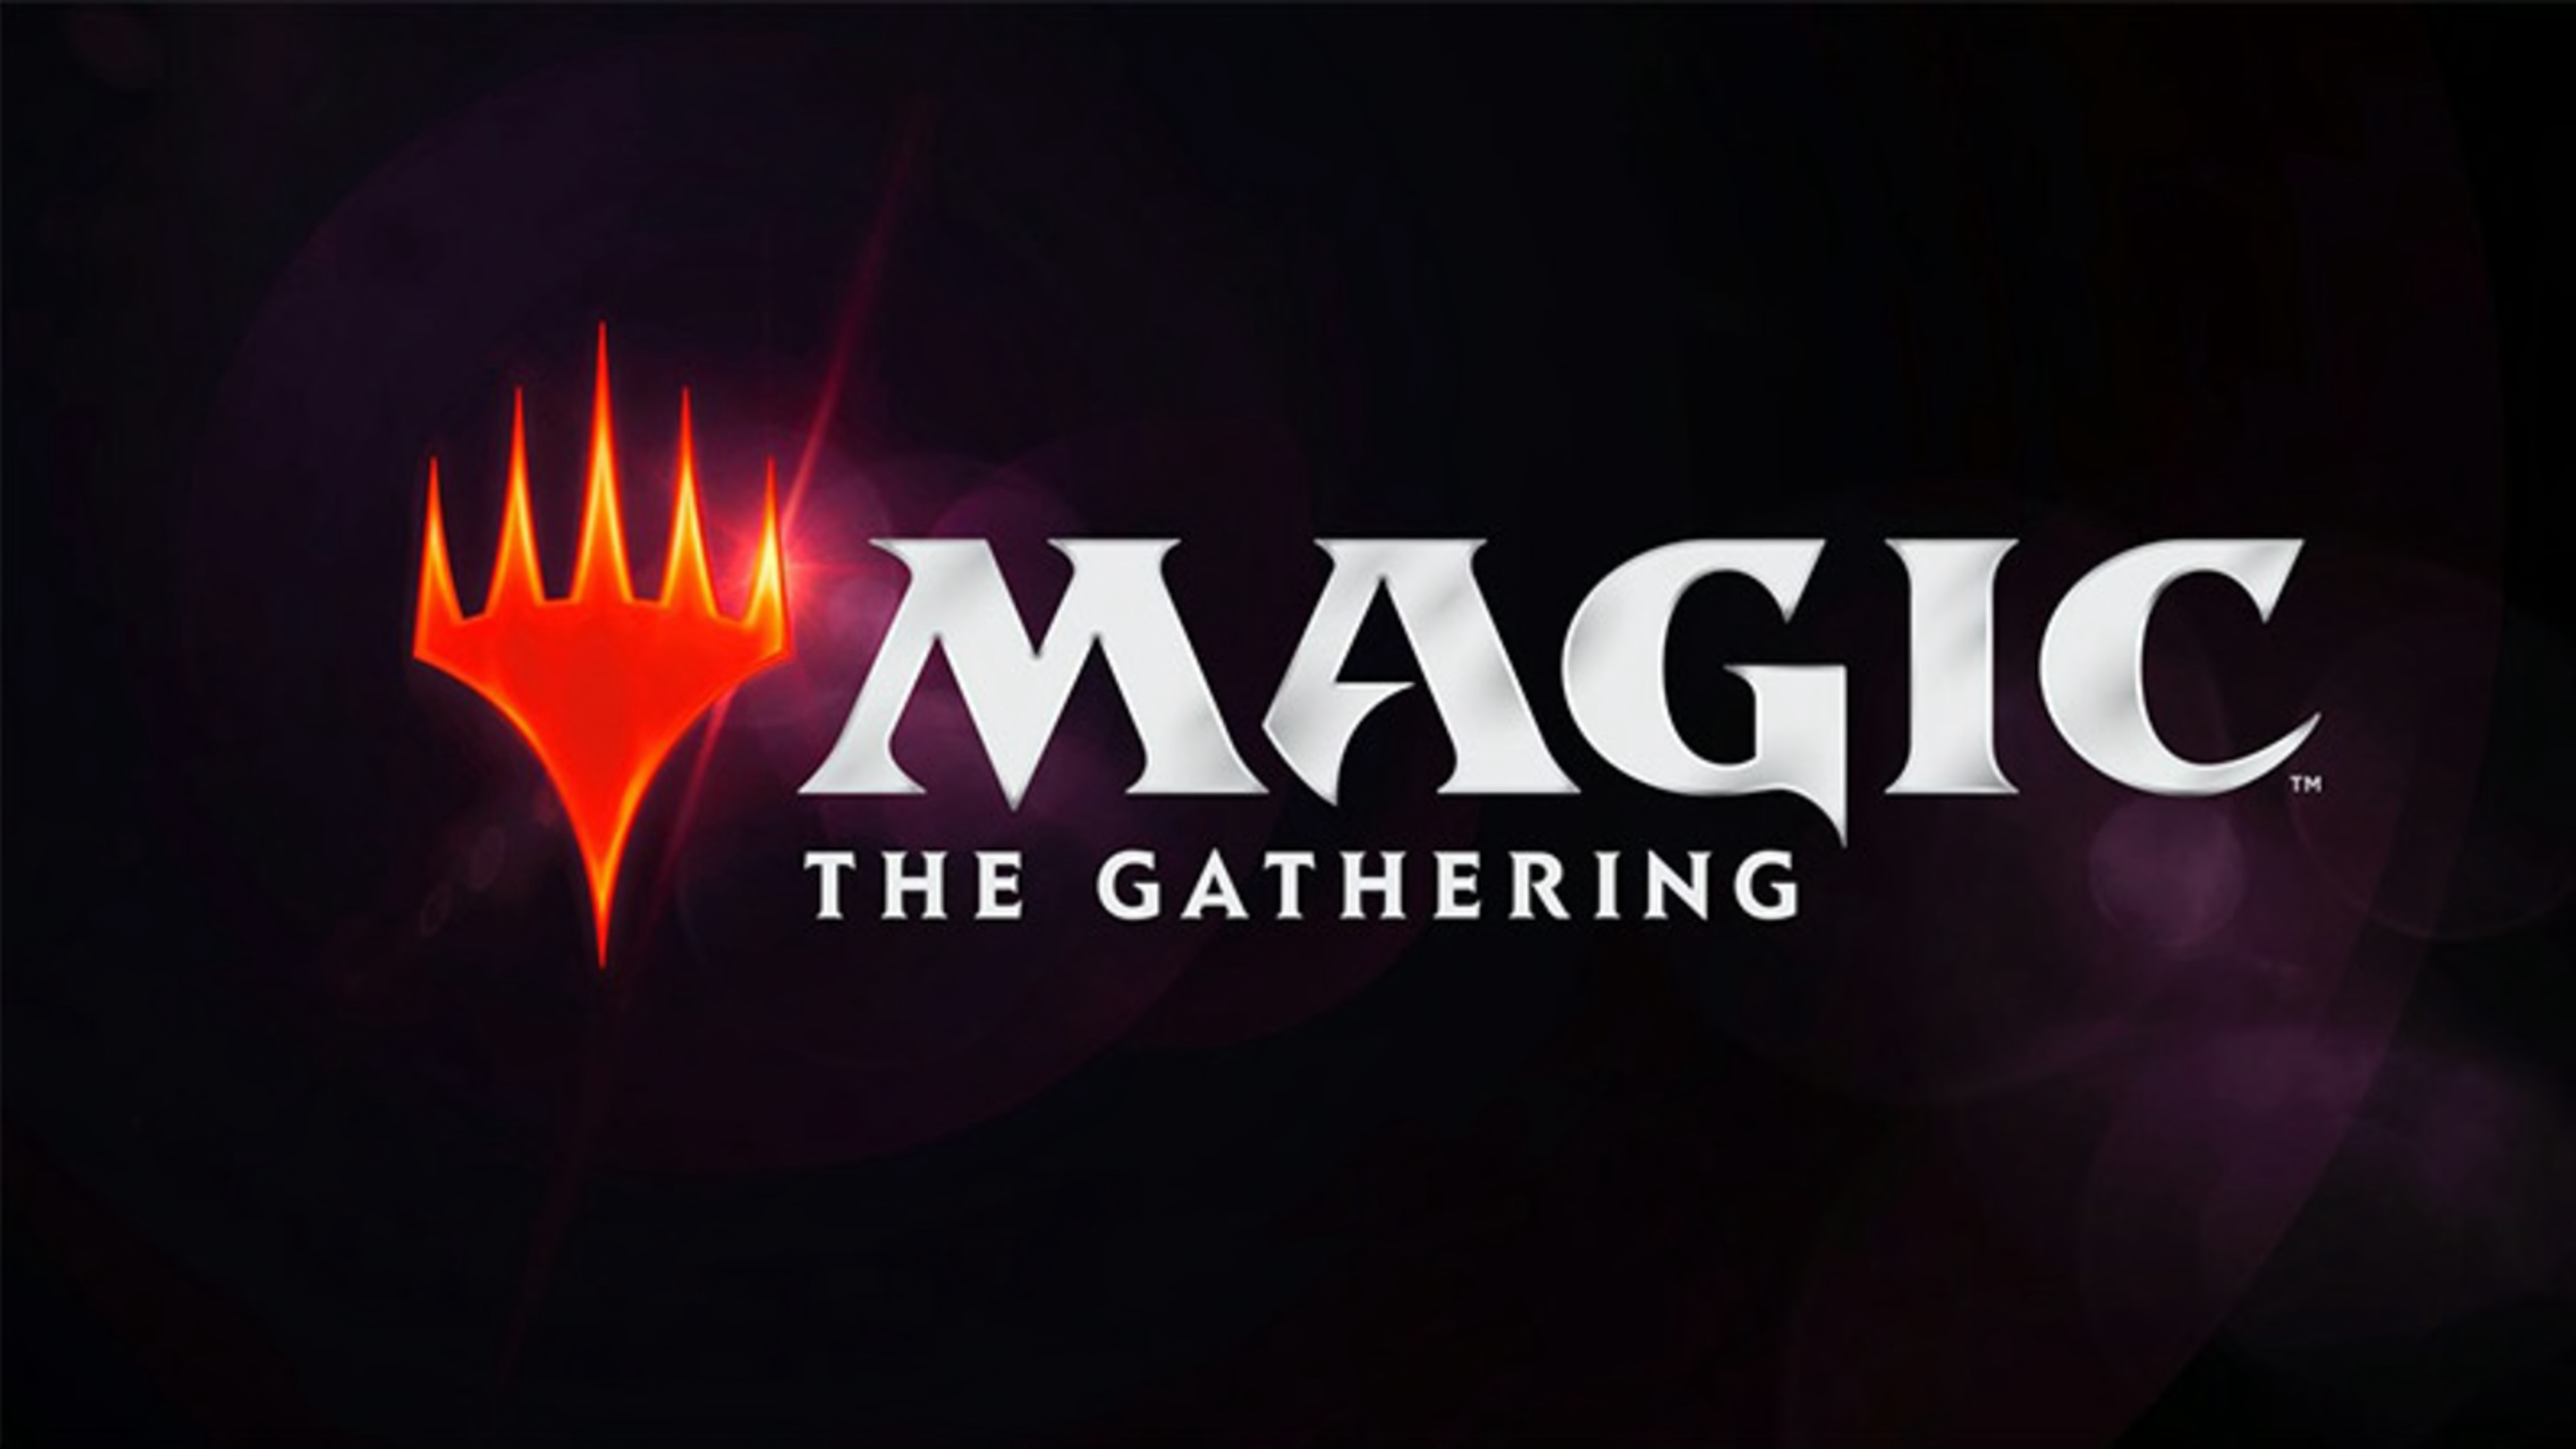 Magic: The Gathering's Lord of the Rings crossover is going to be huge -  Polygon